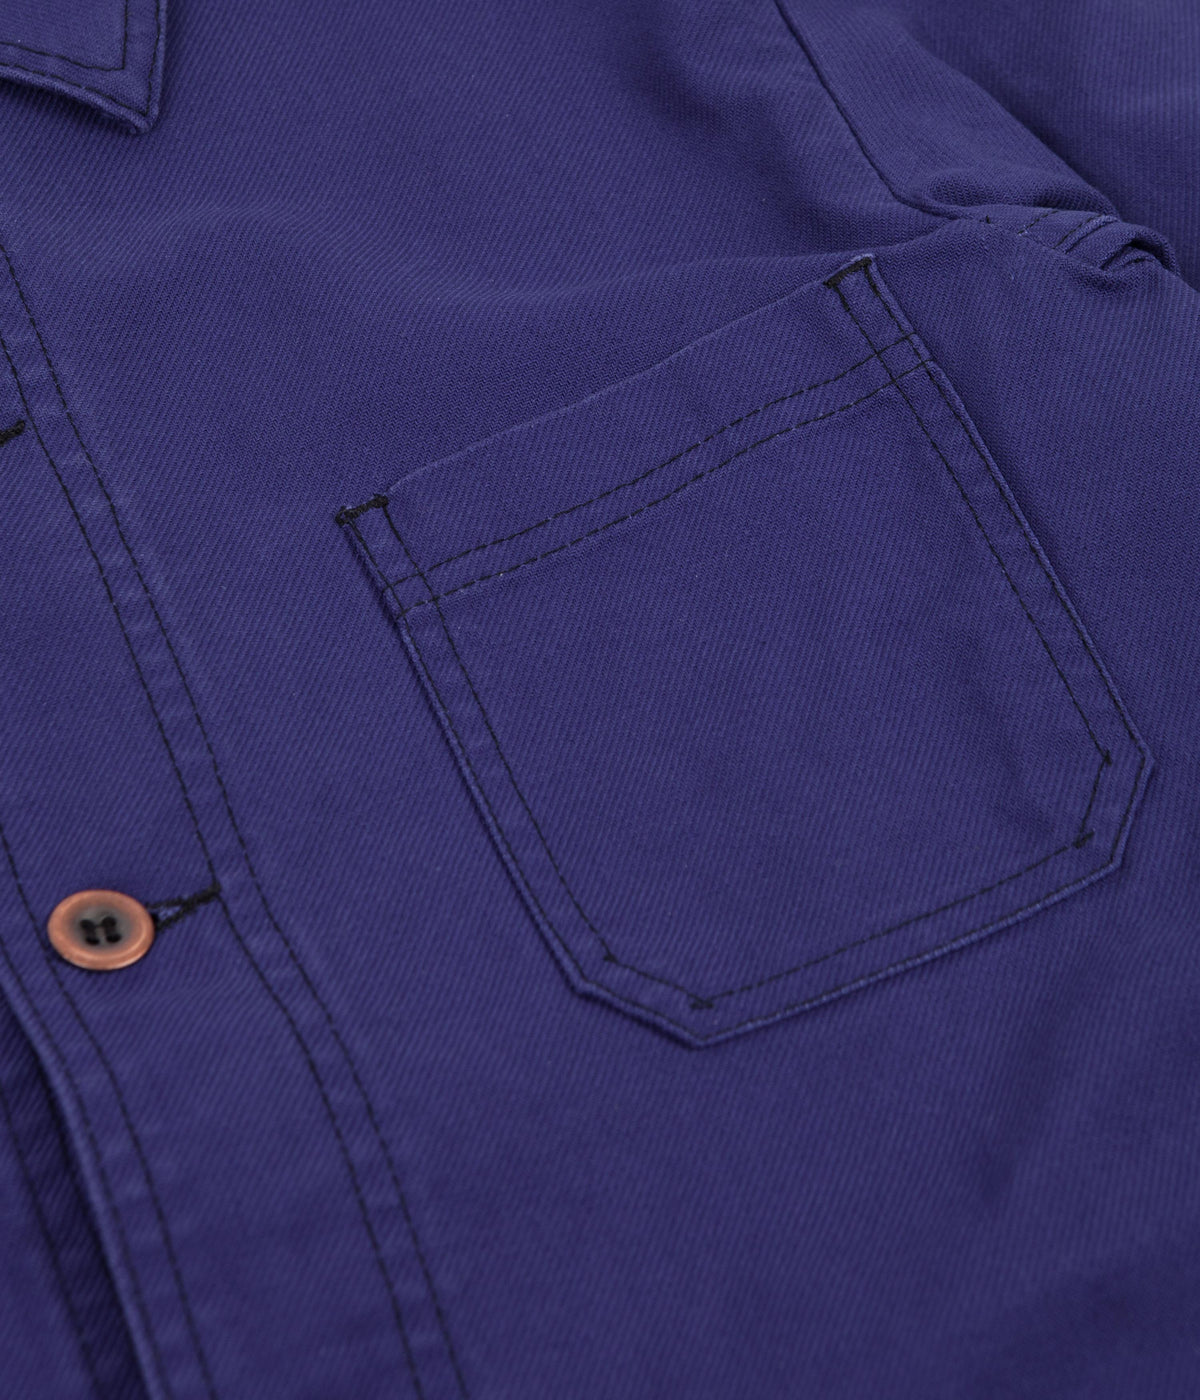 Vetra 5C Organic Workwear Jacket - Washed Hydrone | Always in Colour